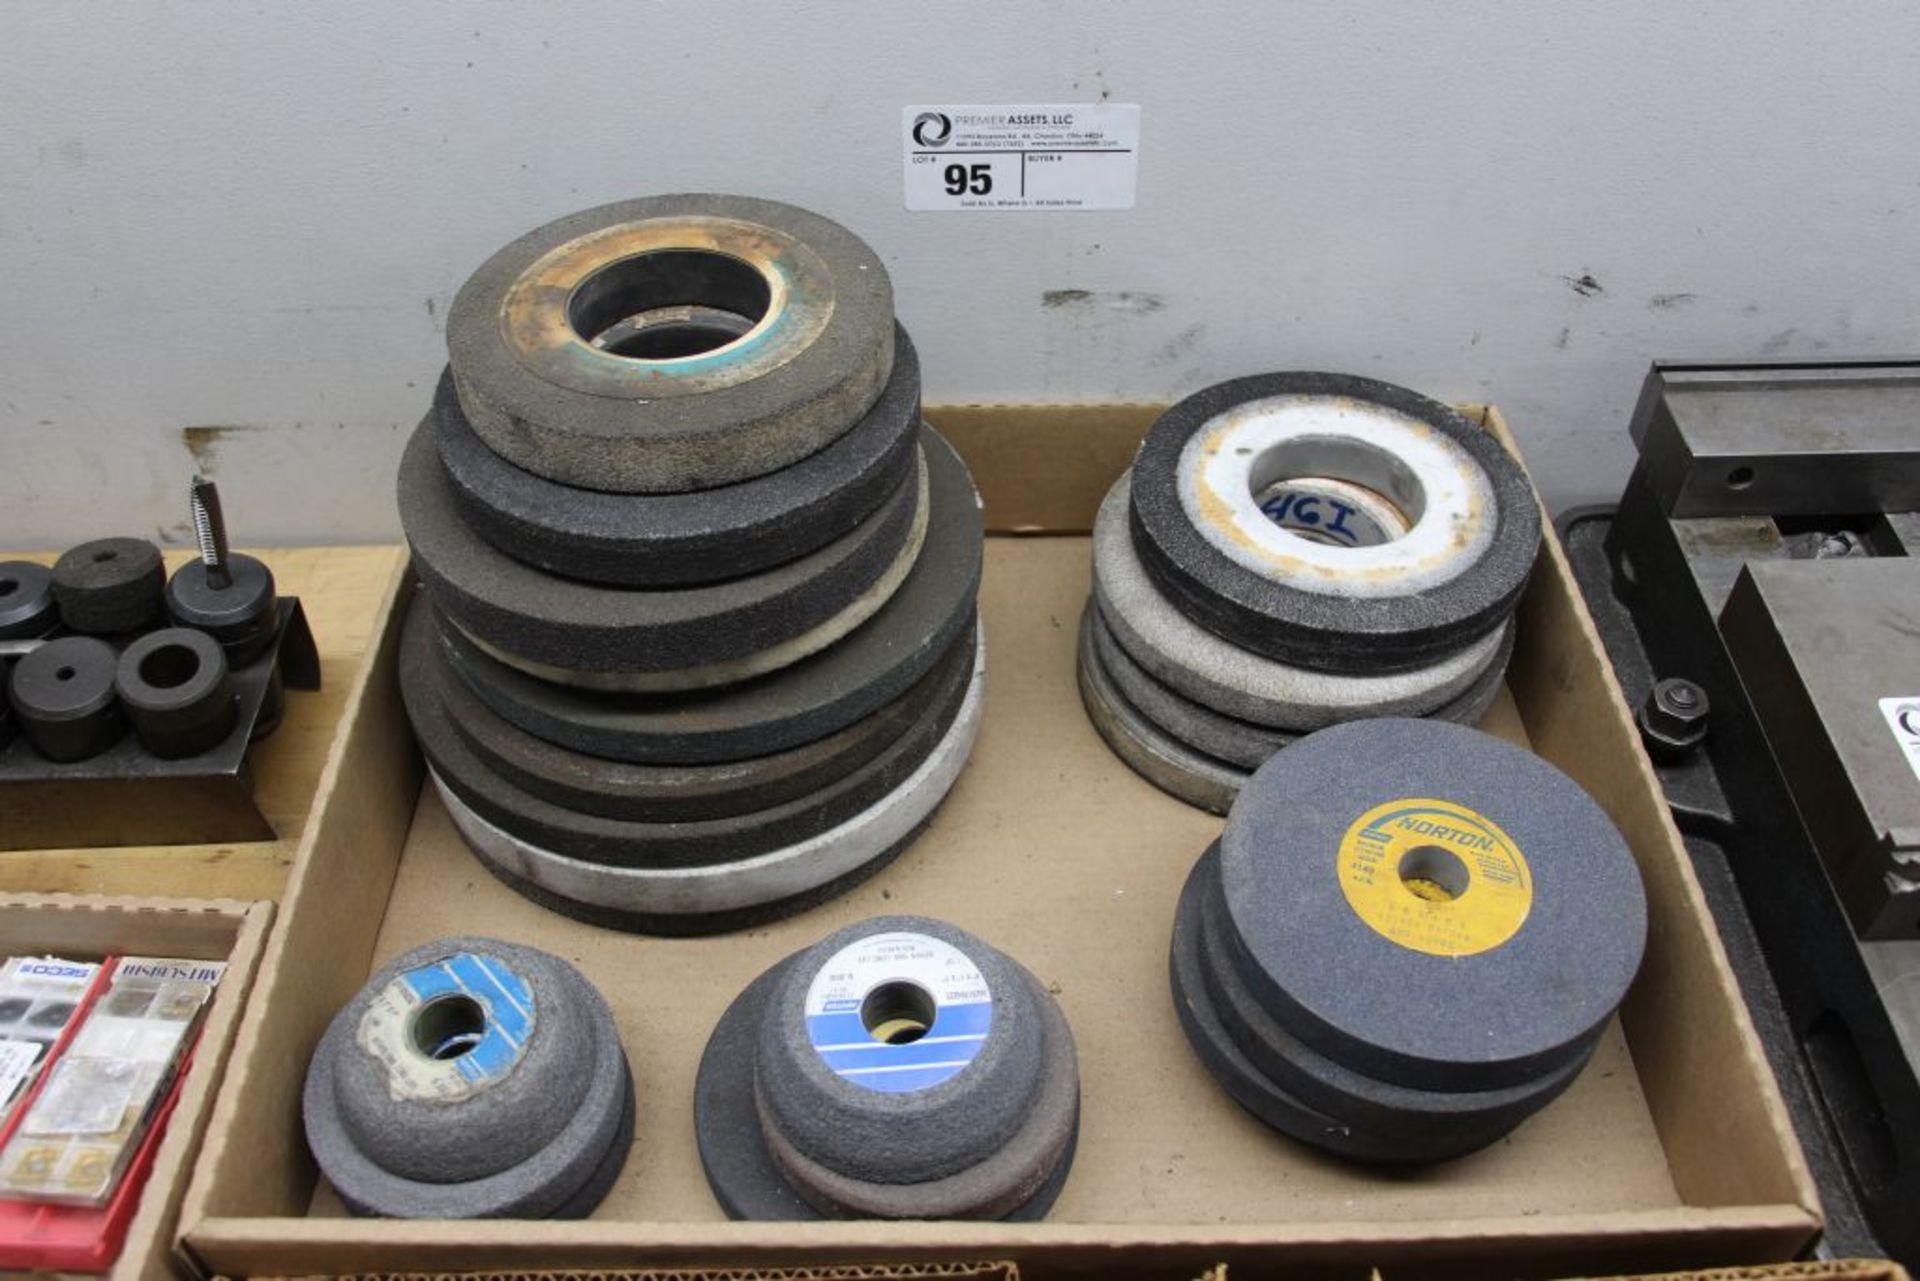 Assortment of grinding wheels, various sizes